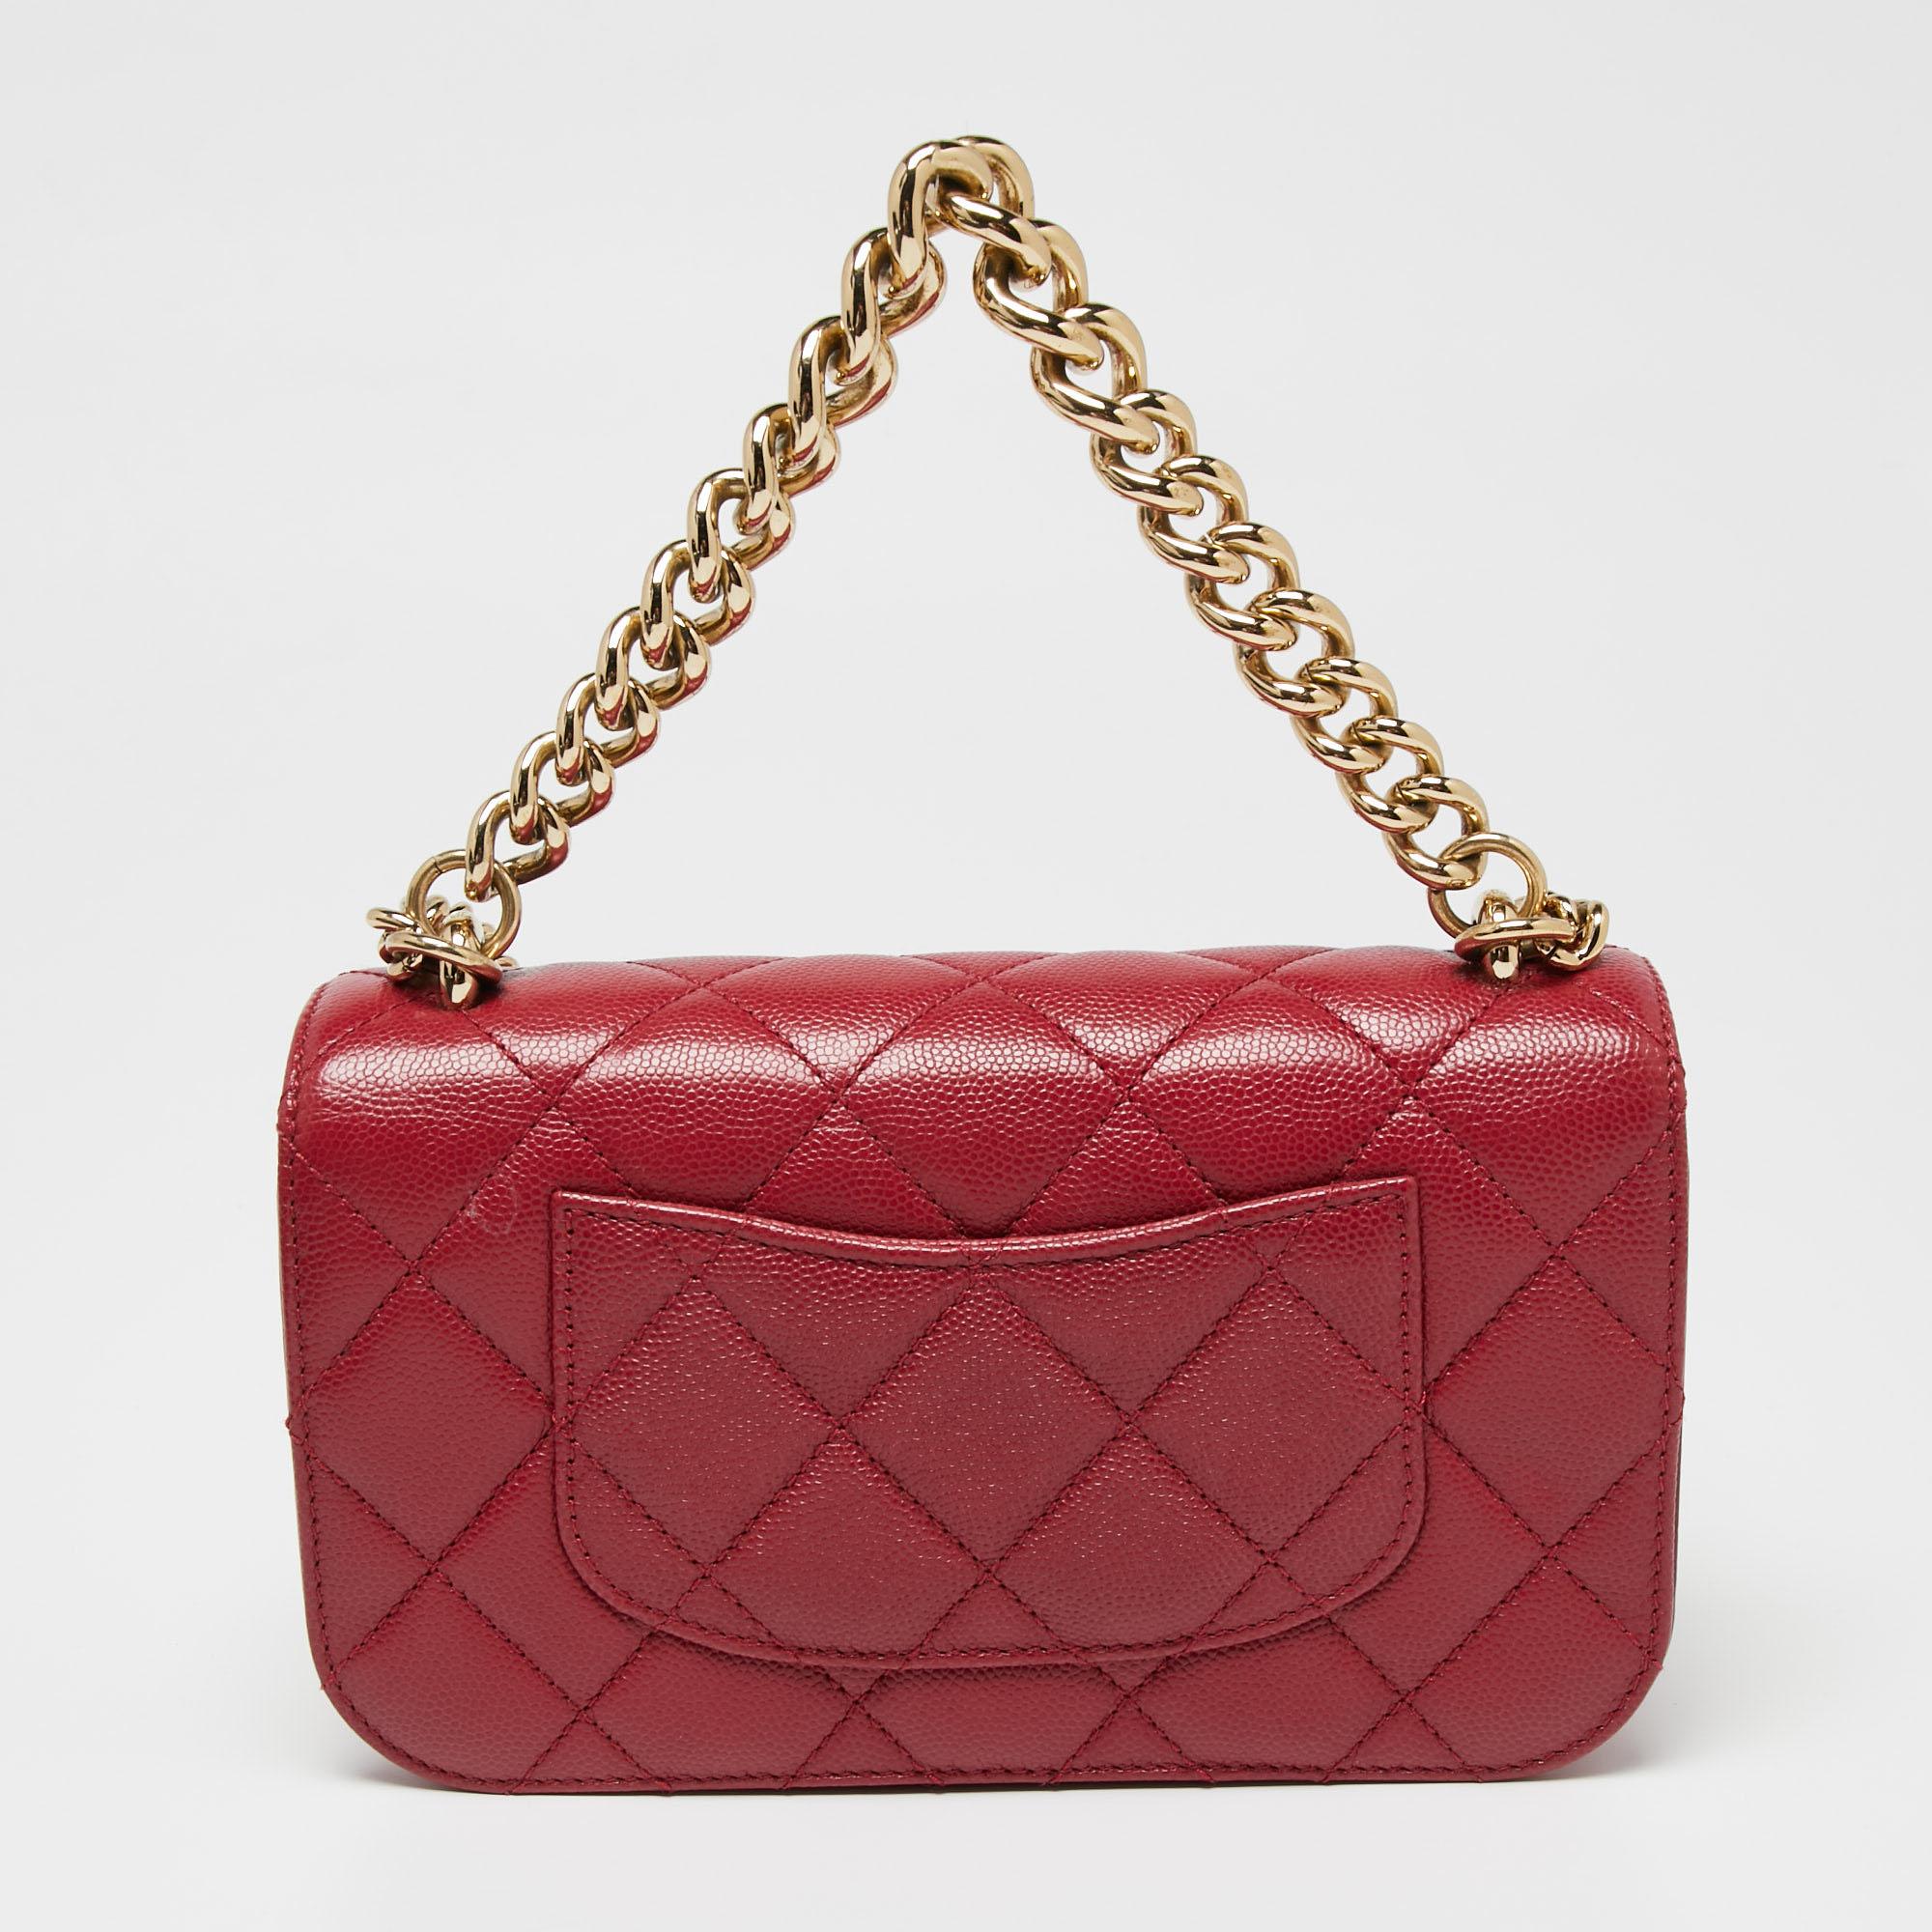 The gold-tone metal studs, the CC lock on the flap, and the diamond quilt combine to make this Chanel flap bag a special one. It is sewn using cherry red Caviar leather and held by two different handles.

Includes: Original Dustbag, Original Box,